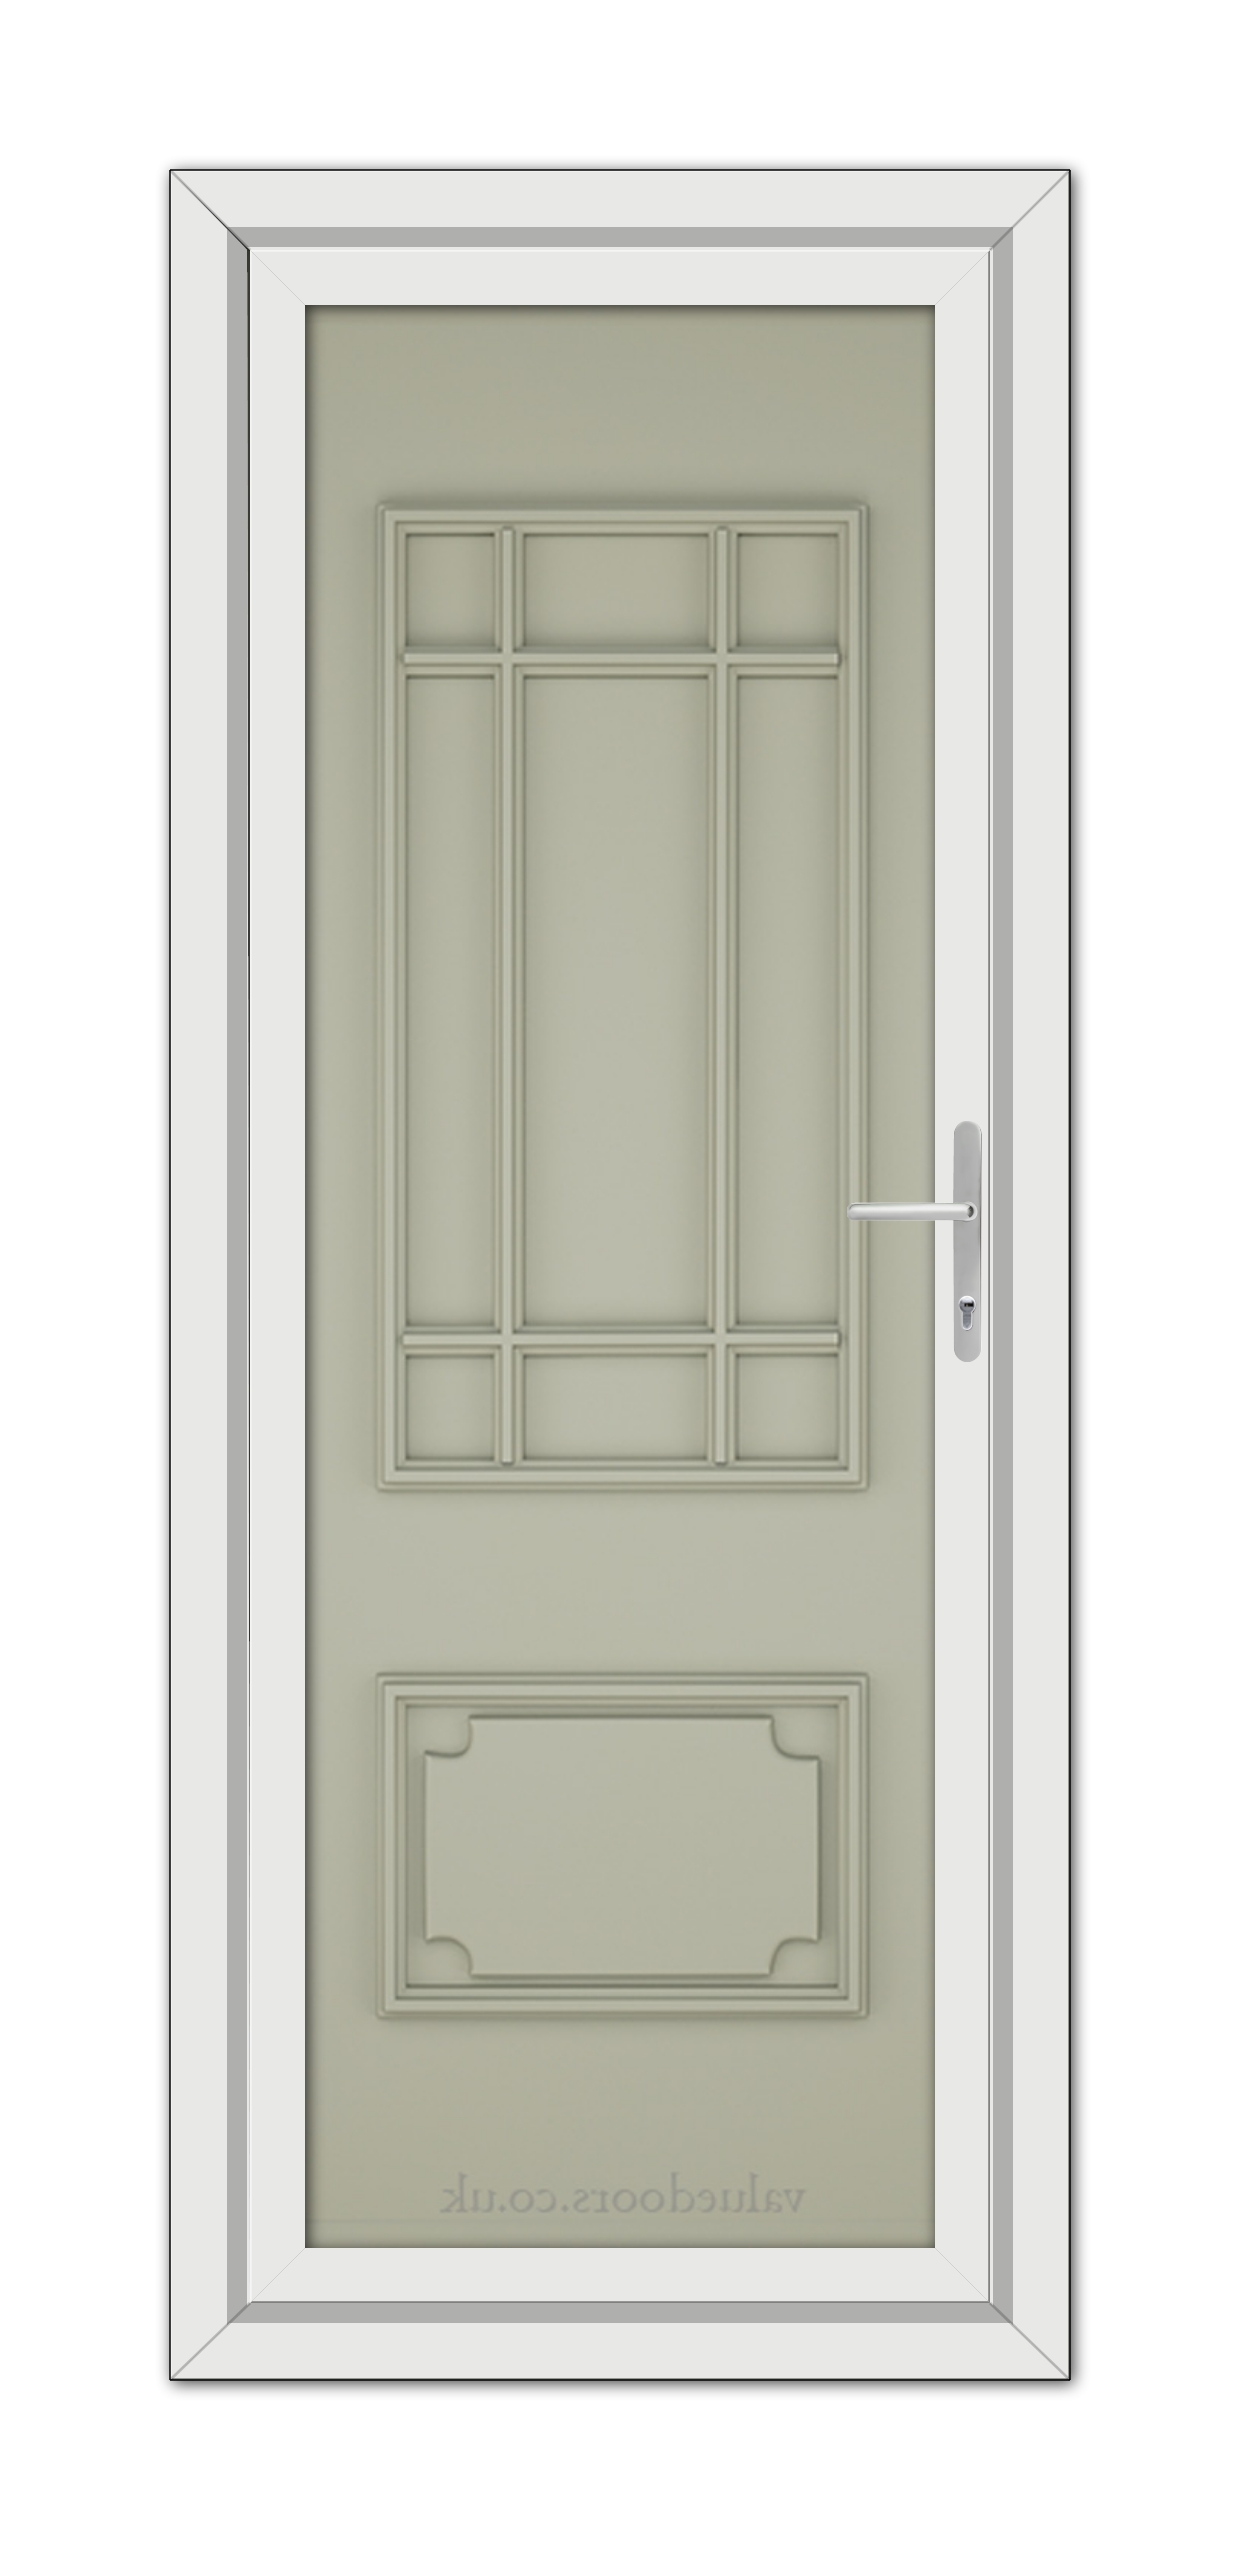 A vertical image of a closed, Agate Grey Seville Solid uPVC Door with a rectangular window design and a modern handle, in a white frame.